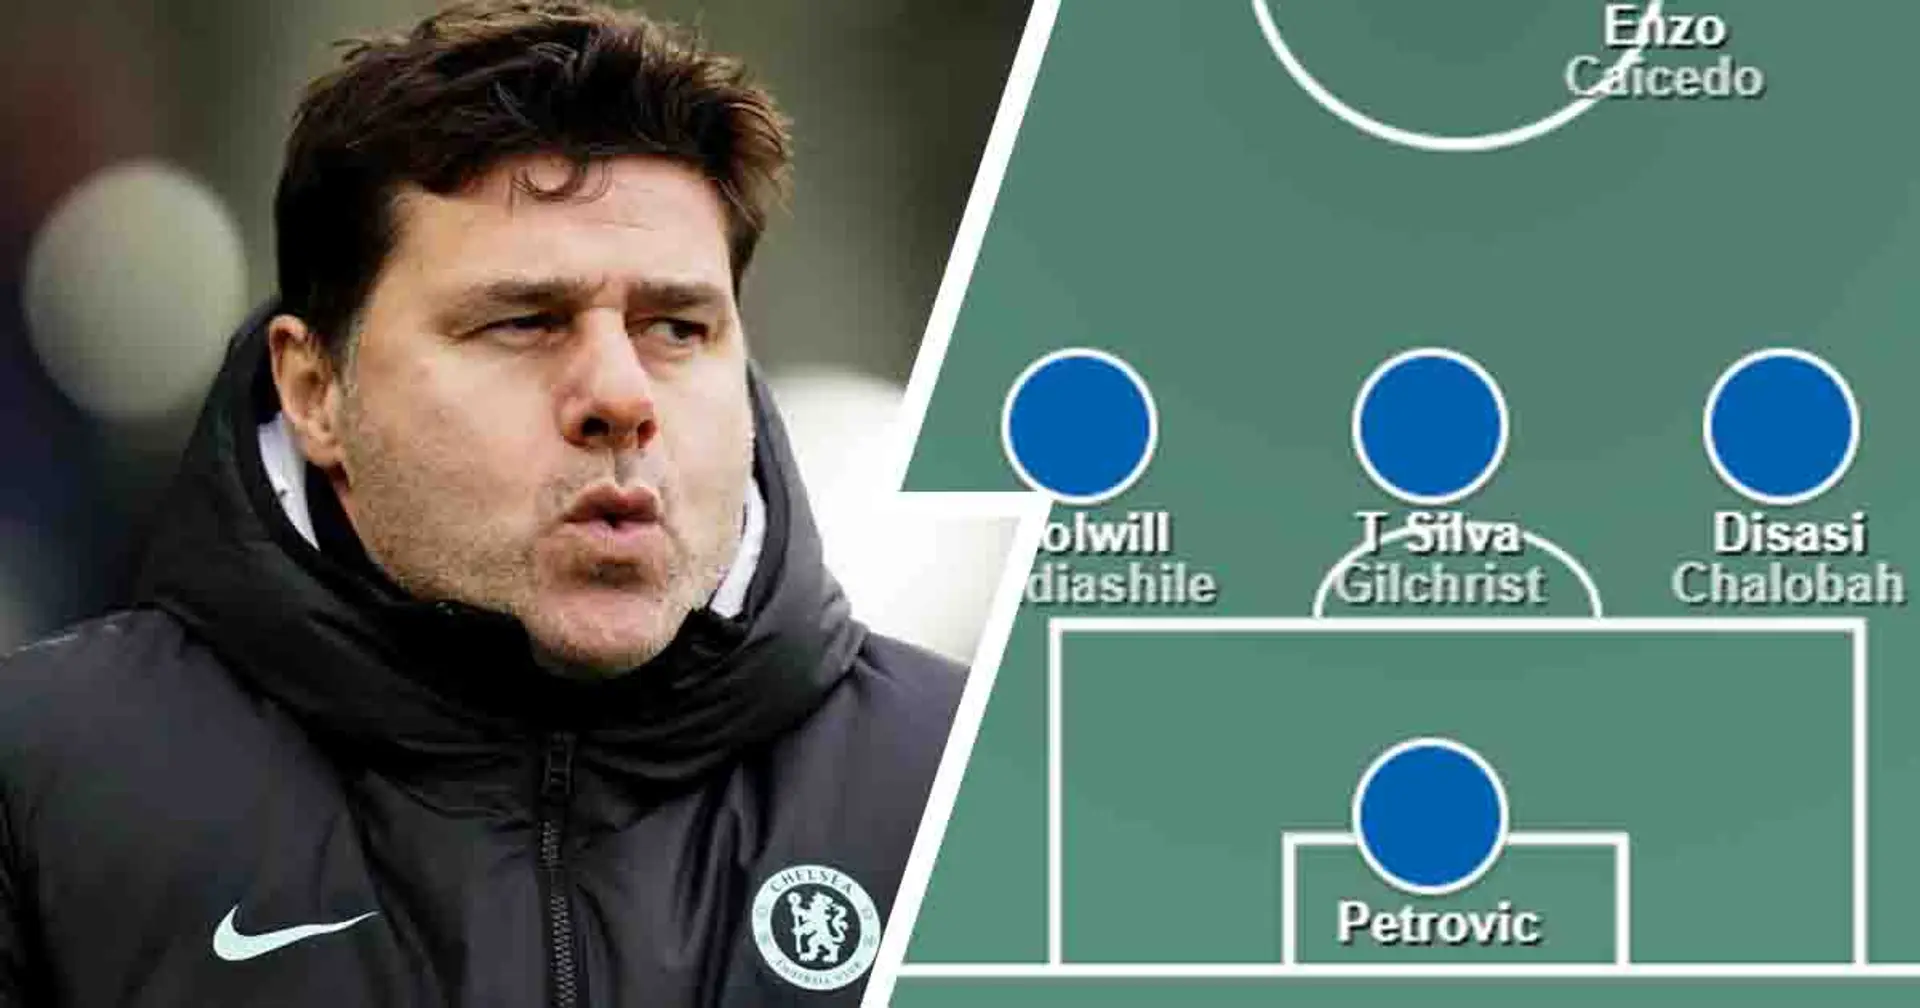 Pochettino pondering switch to new formation & 4 more big Chelsea stories you might've missed